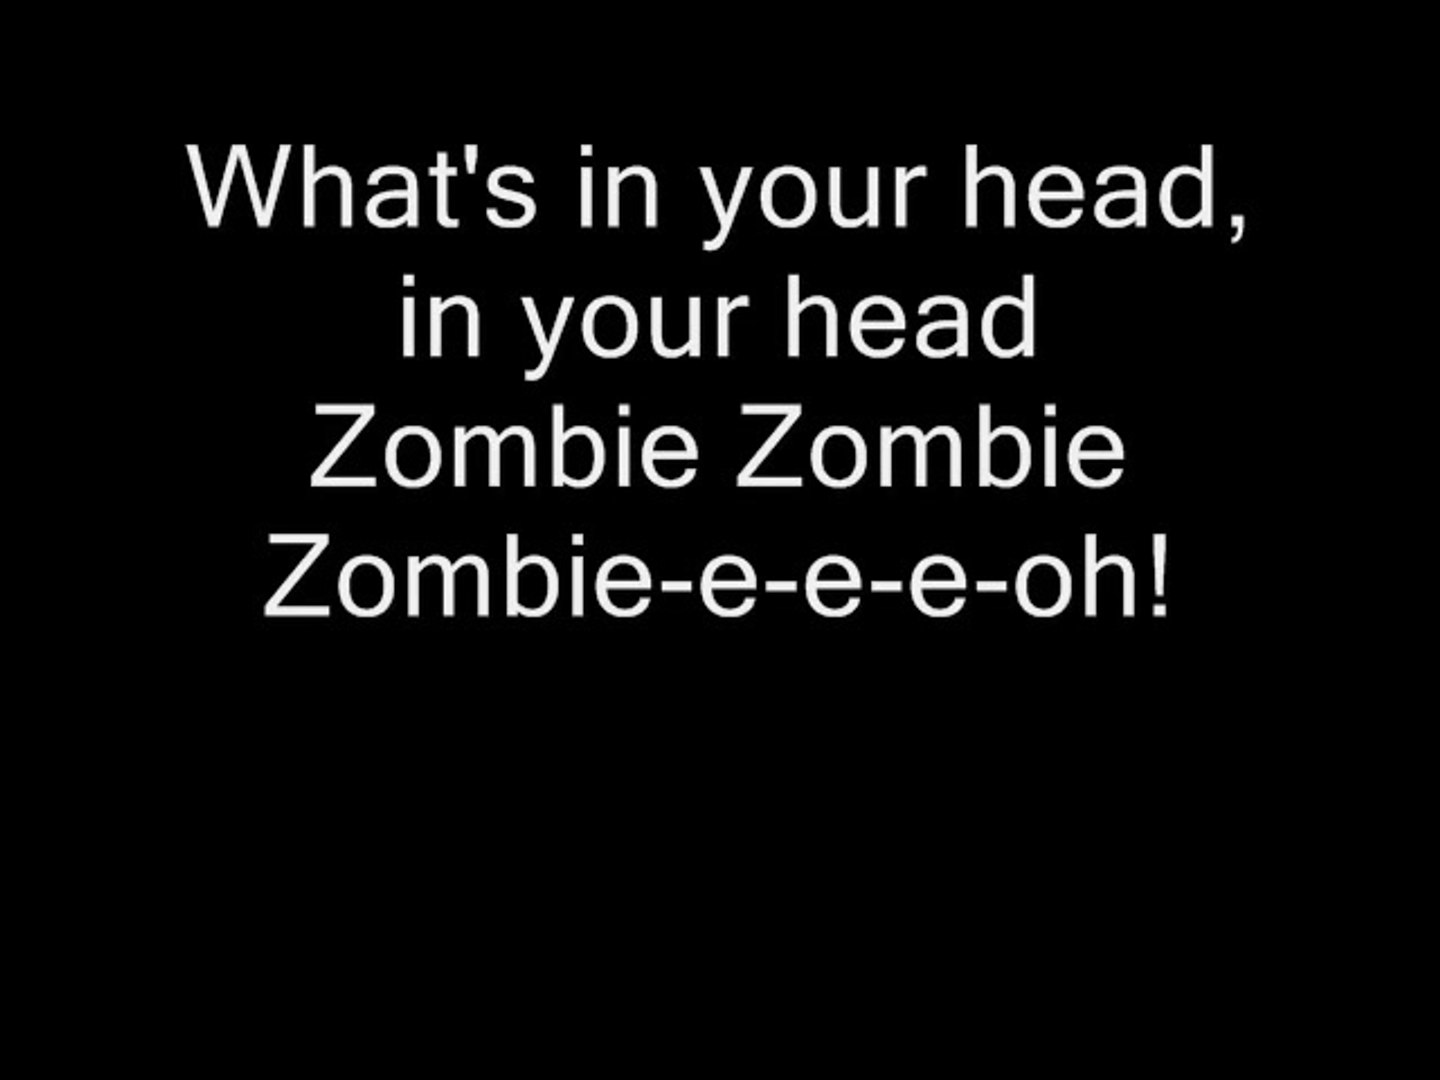 Zombie by The Cranberries  The cranberries lyrics, Zombie lyrics, The  cranberries zombie